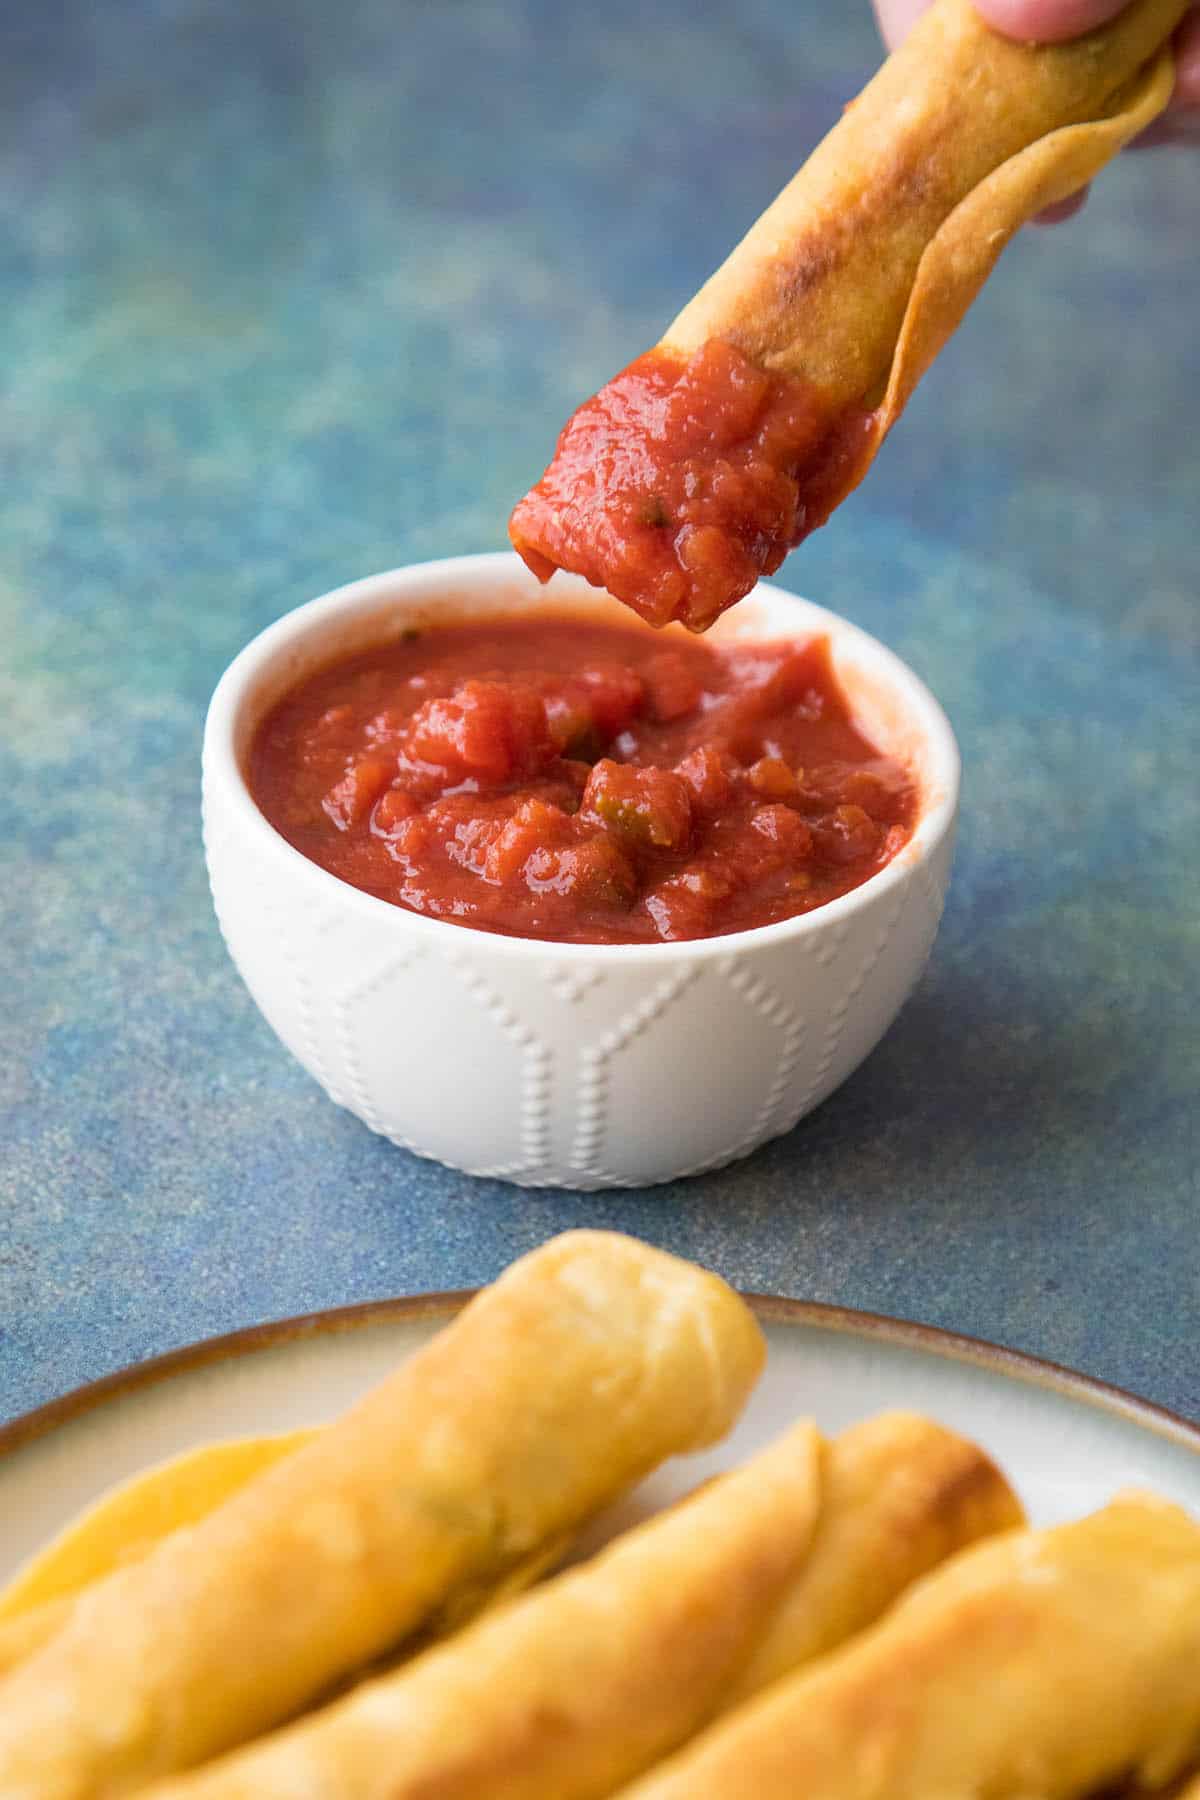 Chicken Taquitos dipped in salsa.